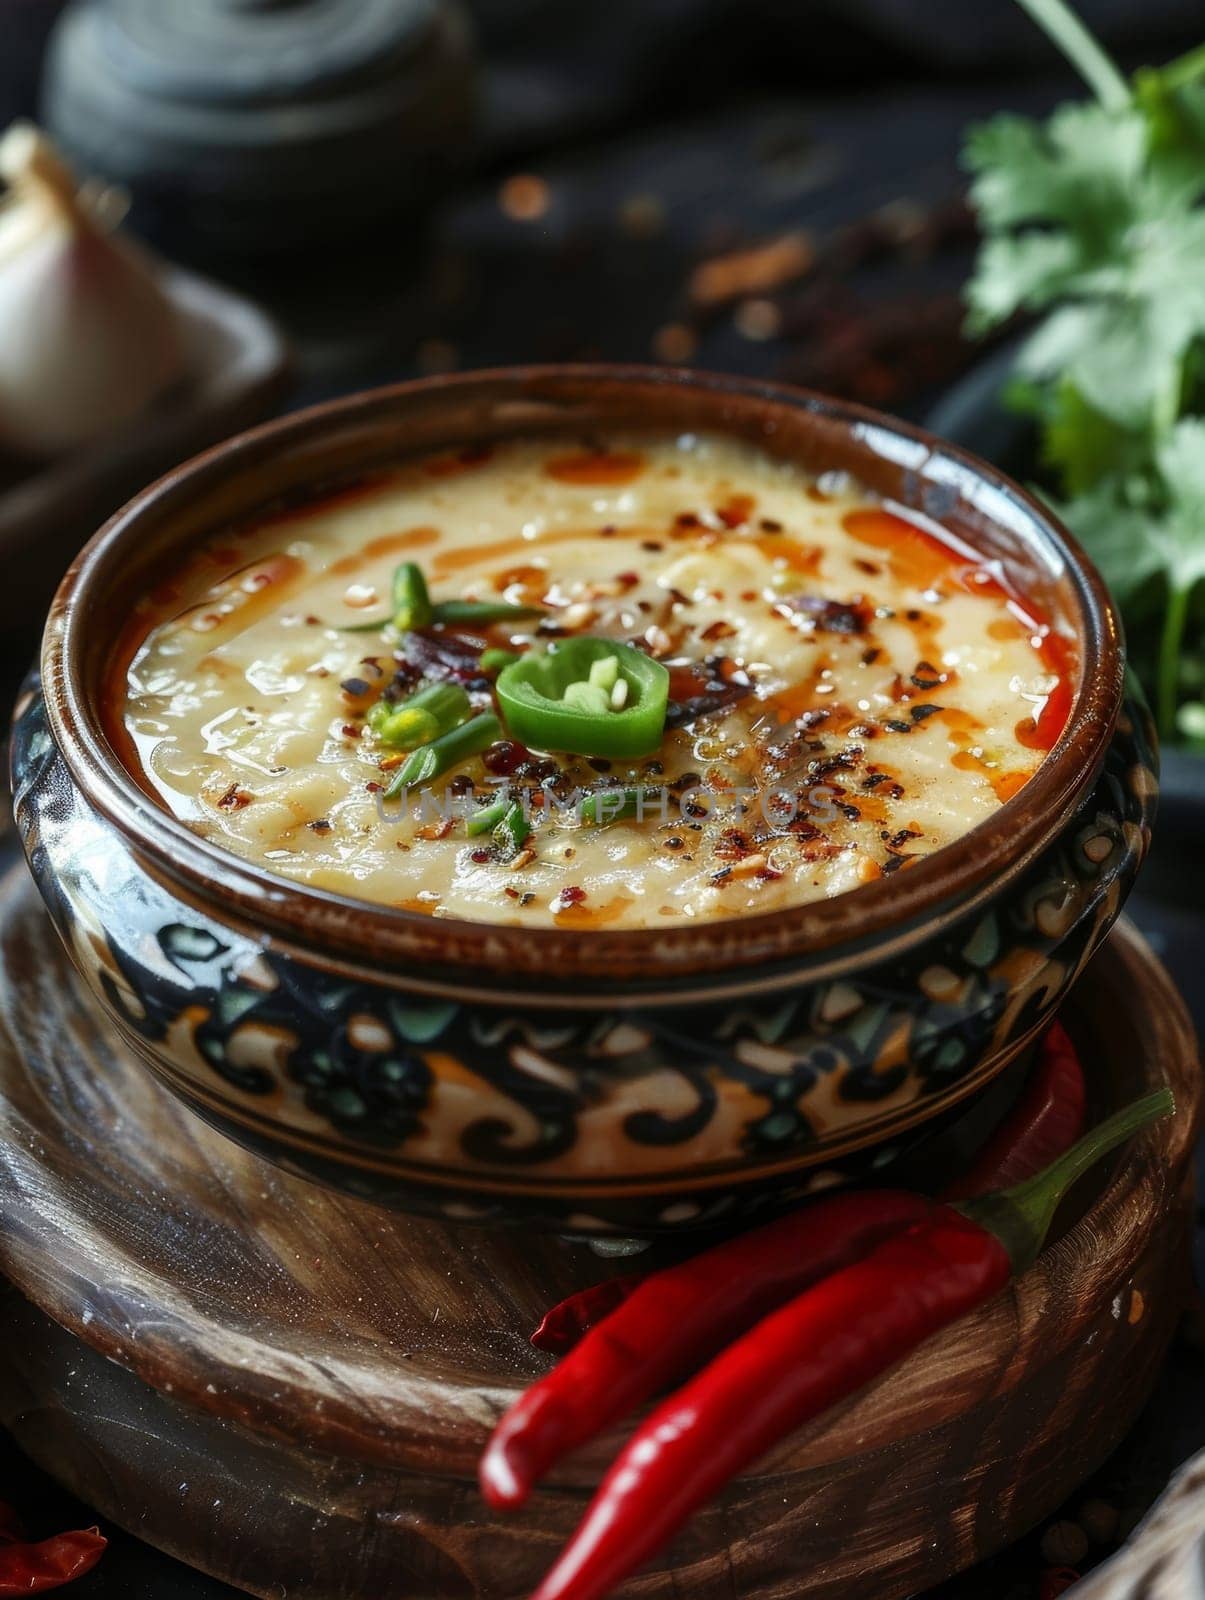 Bhutanese ema datshi in a traditional bowl, with spicy chili peppers and cheese. A traditional and flavorful dish from Bhutan. by sfinks